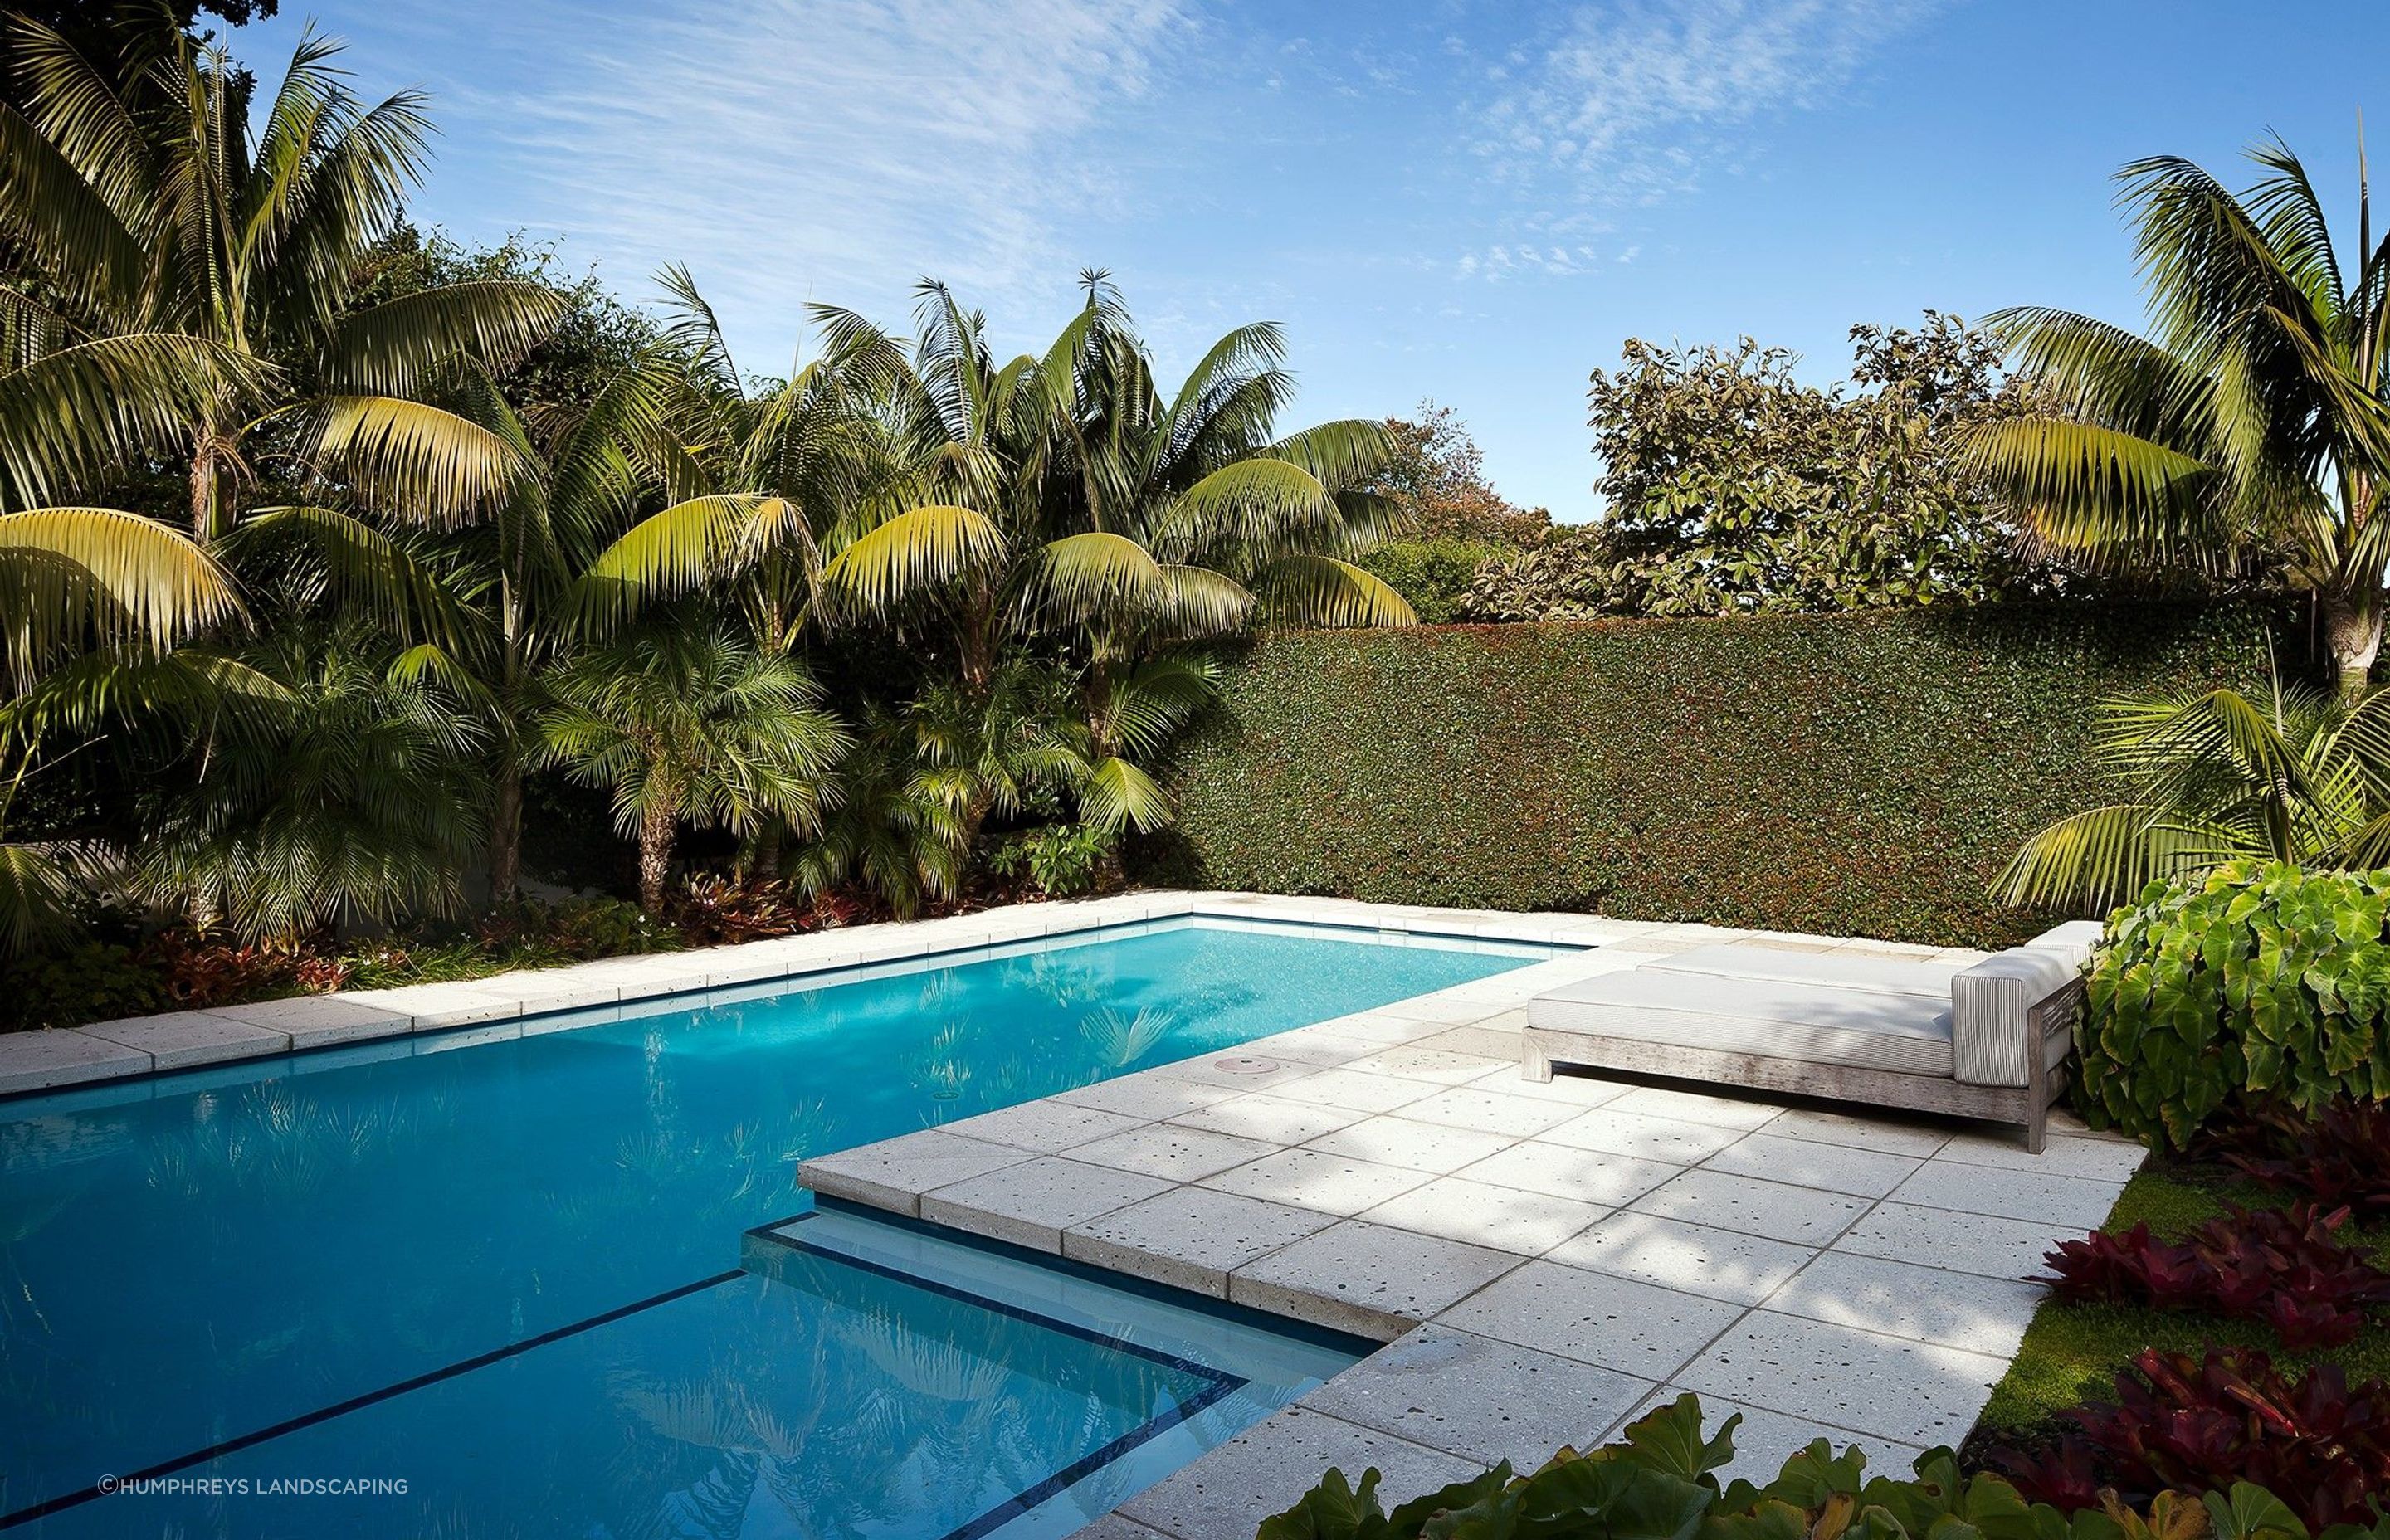 This private swimming pool in Herne Bay uses hedges as a natural form of screening for privacy and an accentuated feeling of seclusion.